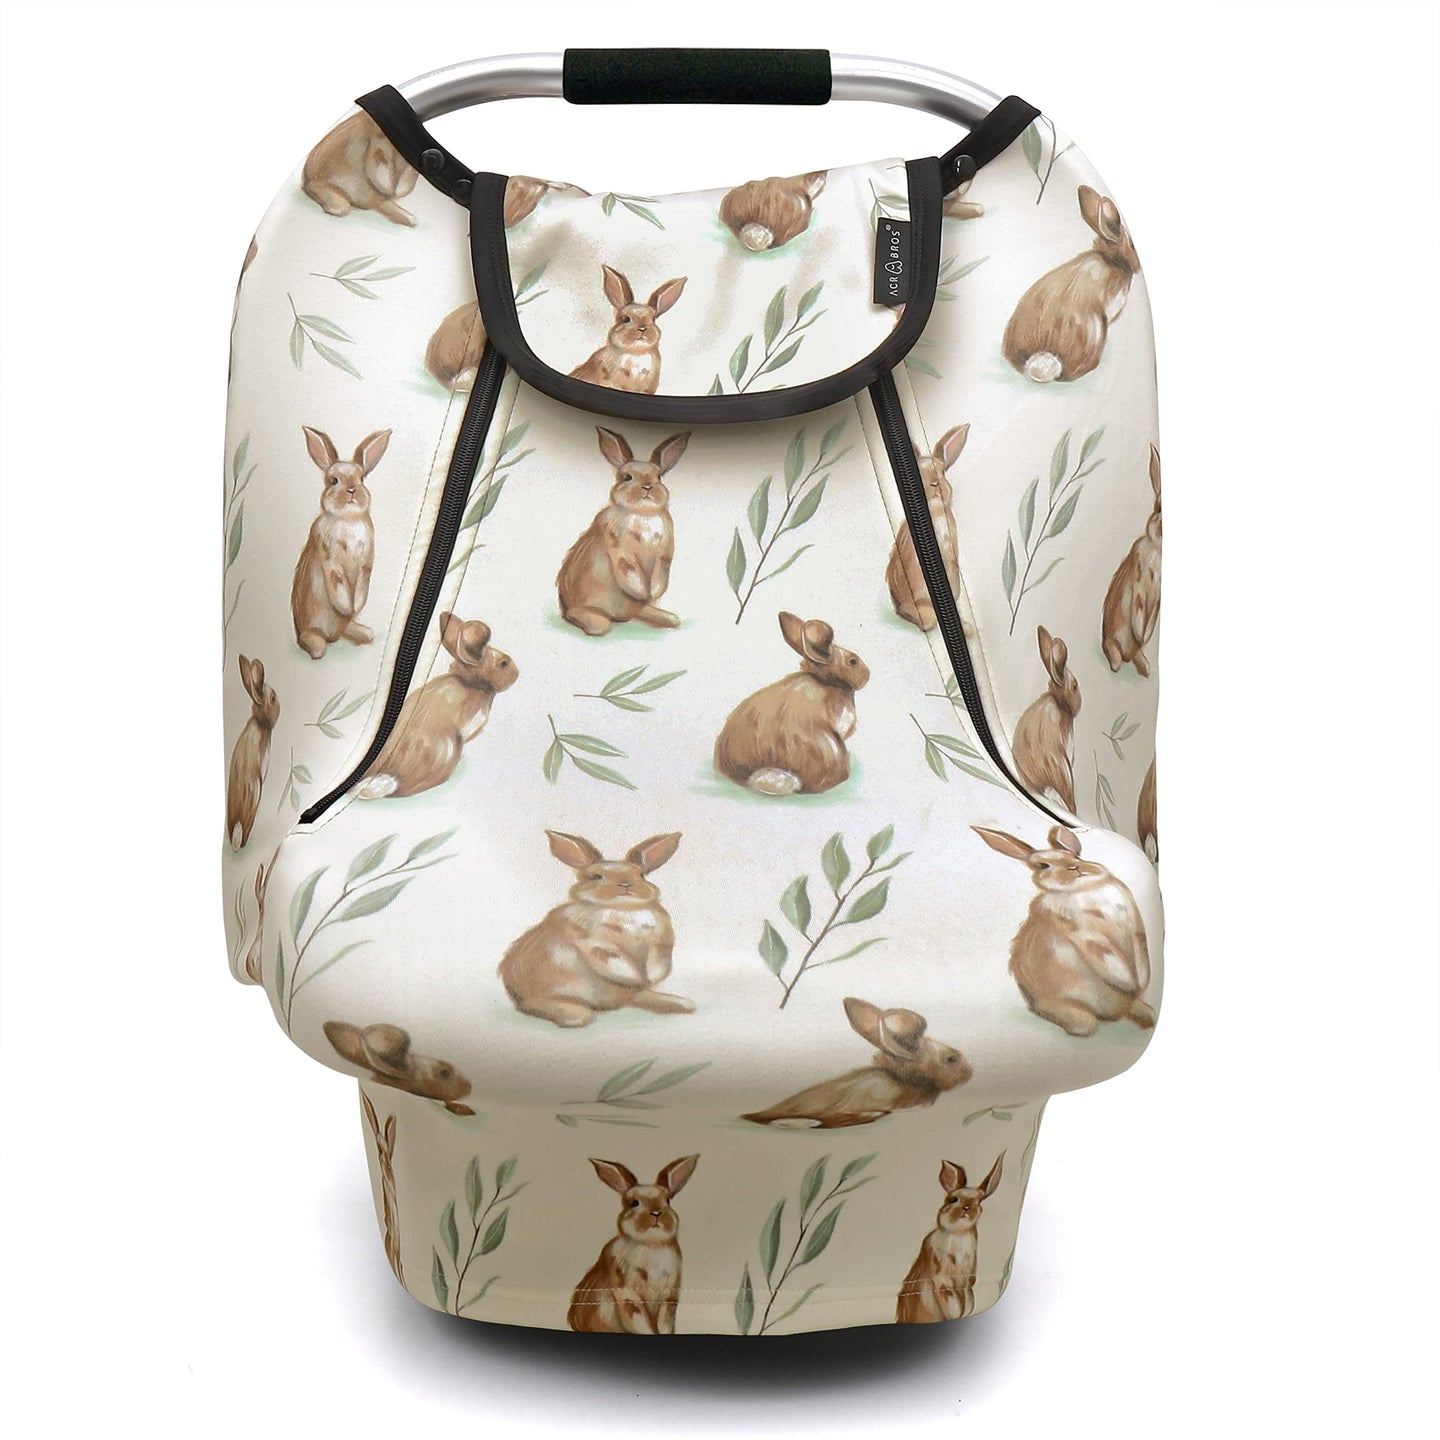 Stretchy Baby Car Seat Covers For All Seasons  Rabbit